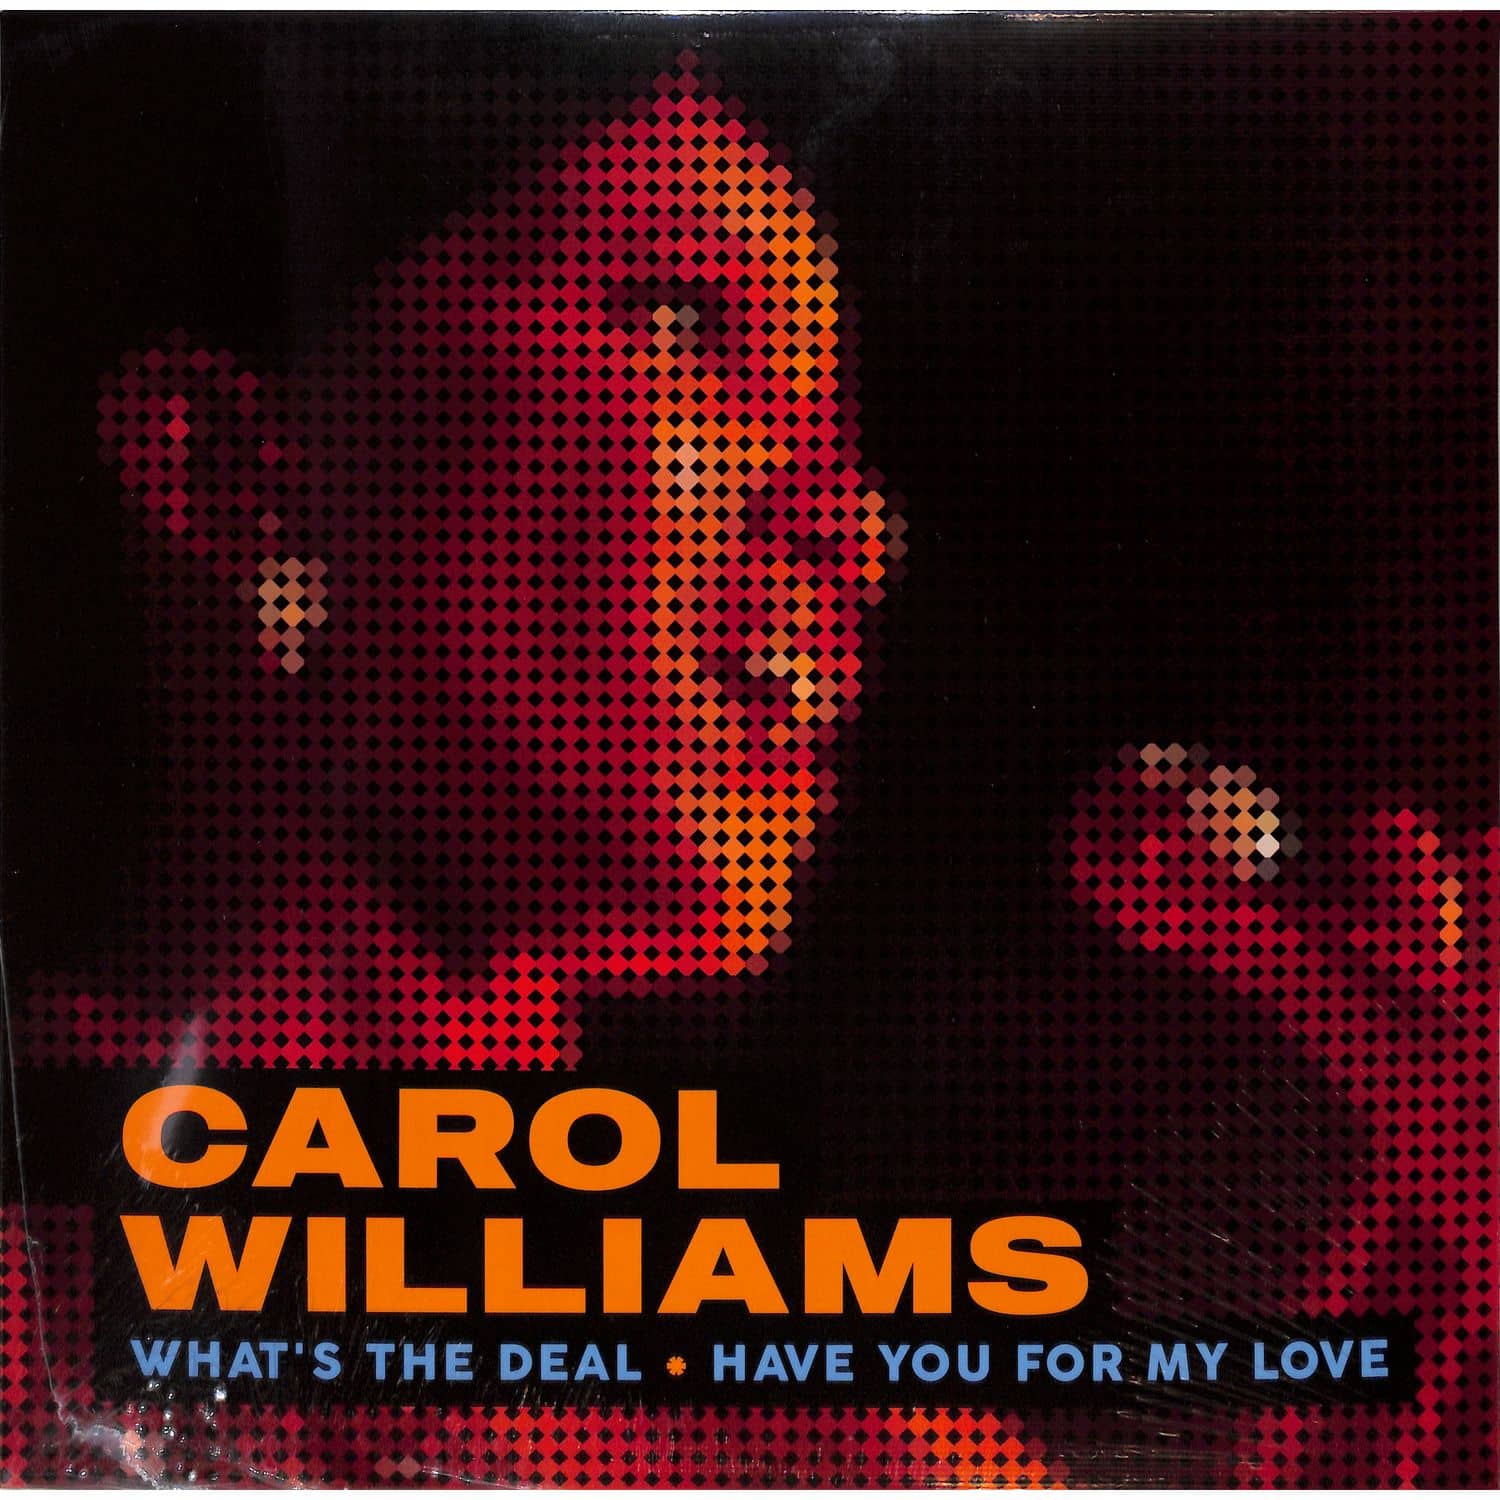 Carol Williams - WHATS THE DEAL / HAVE YOU FOR MY LOVE